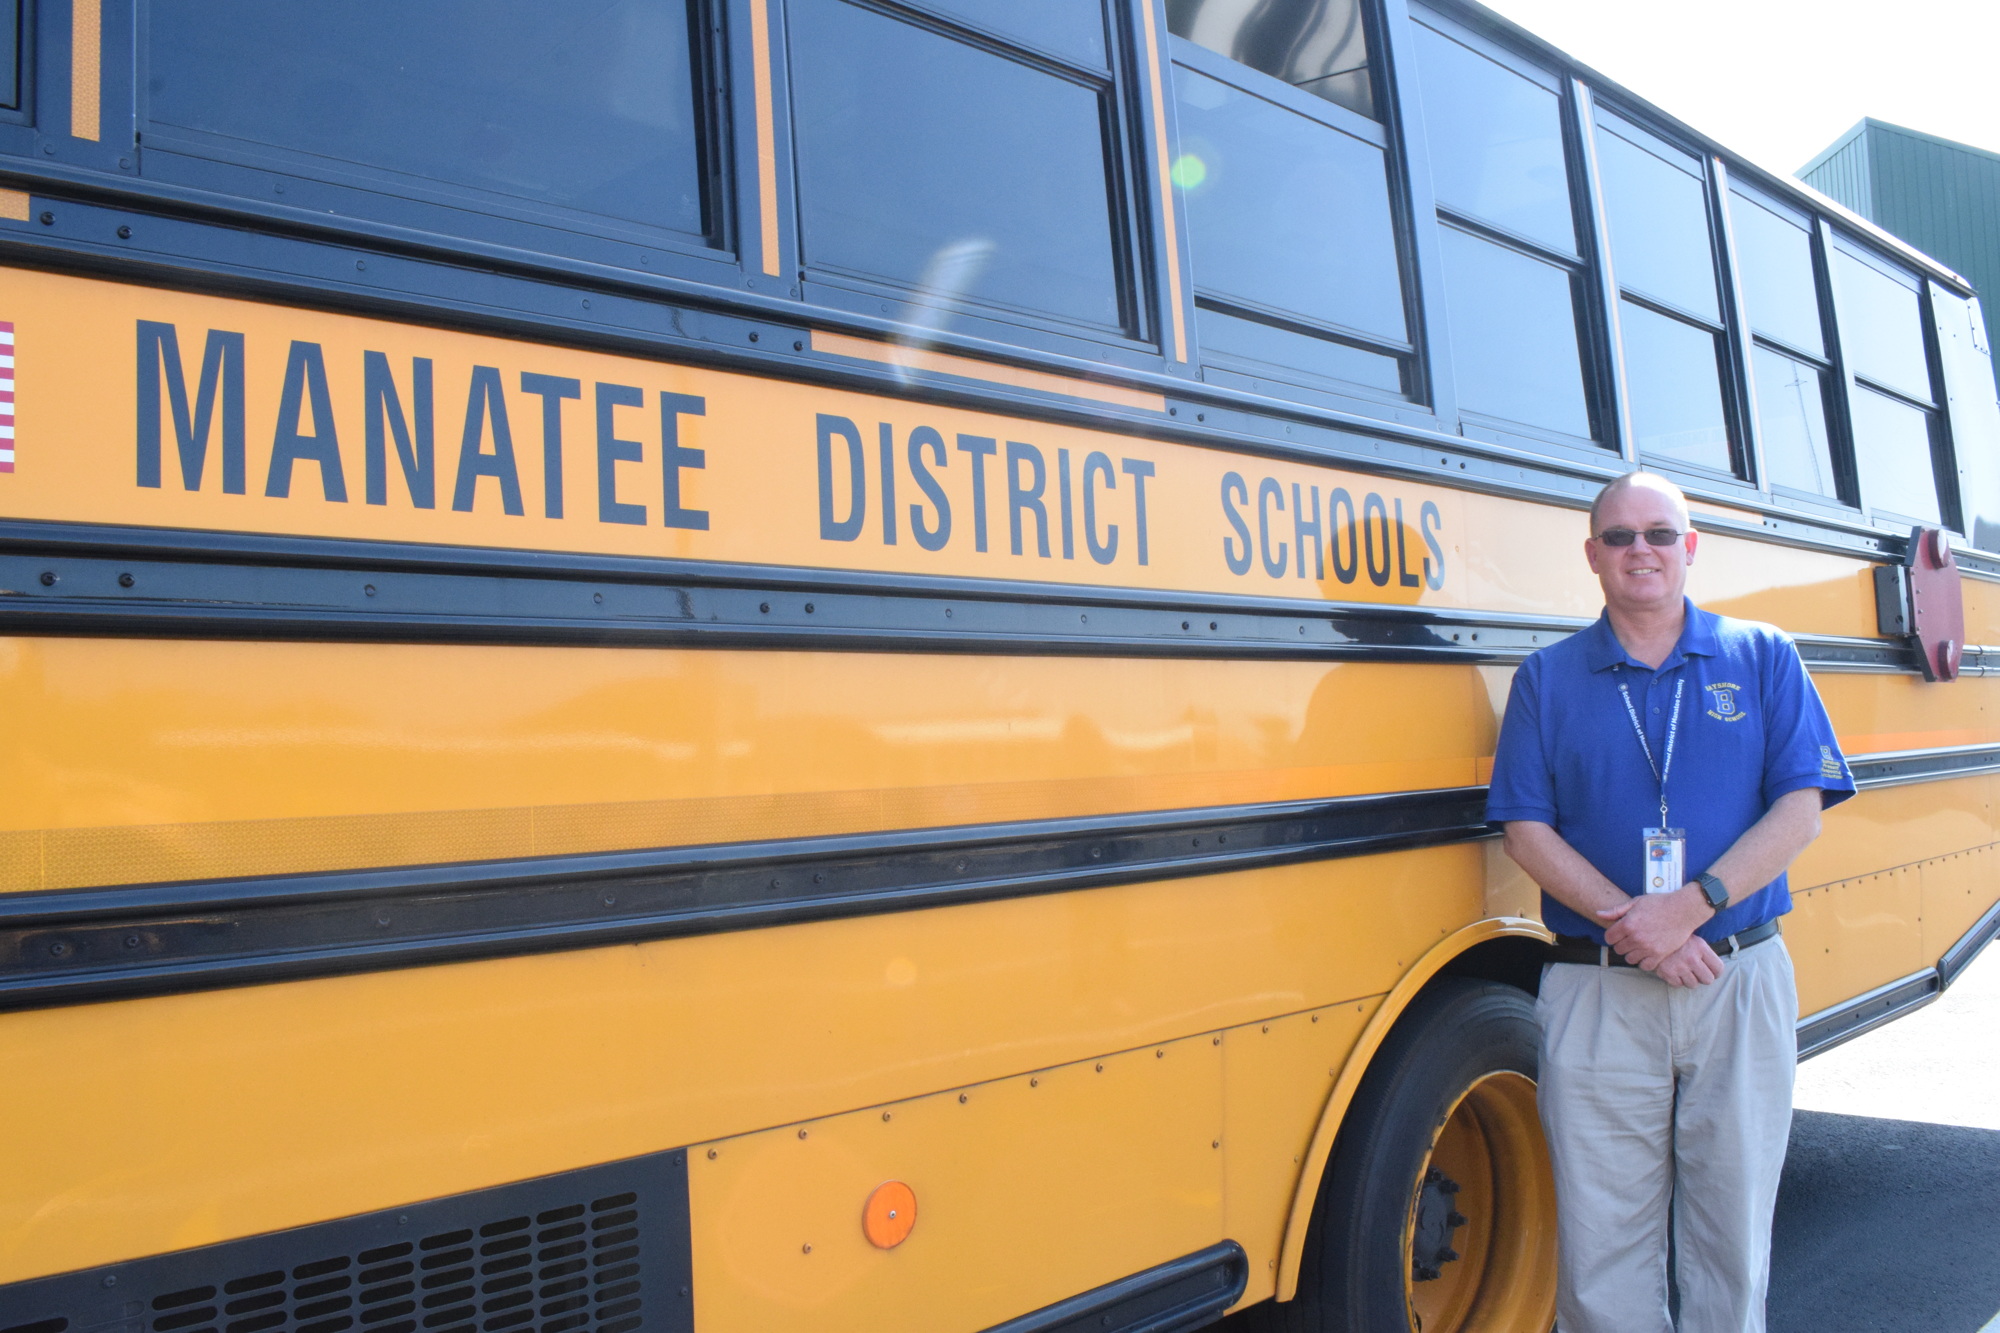 Jamie Warrington, the director of transportation for the School District of Manatee County, says the COVID-19 pandemic has exacerbated the bus driver shortage.